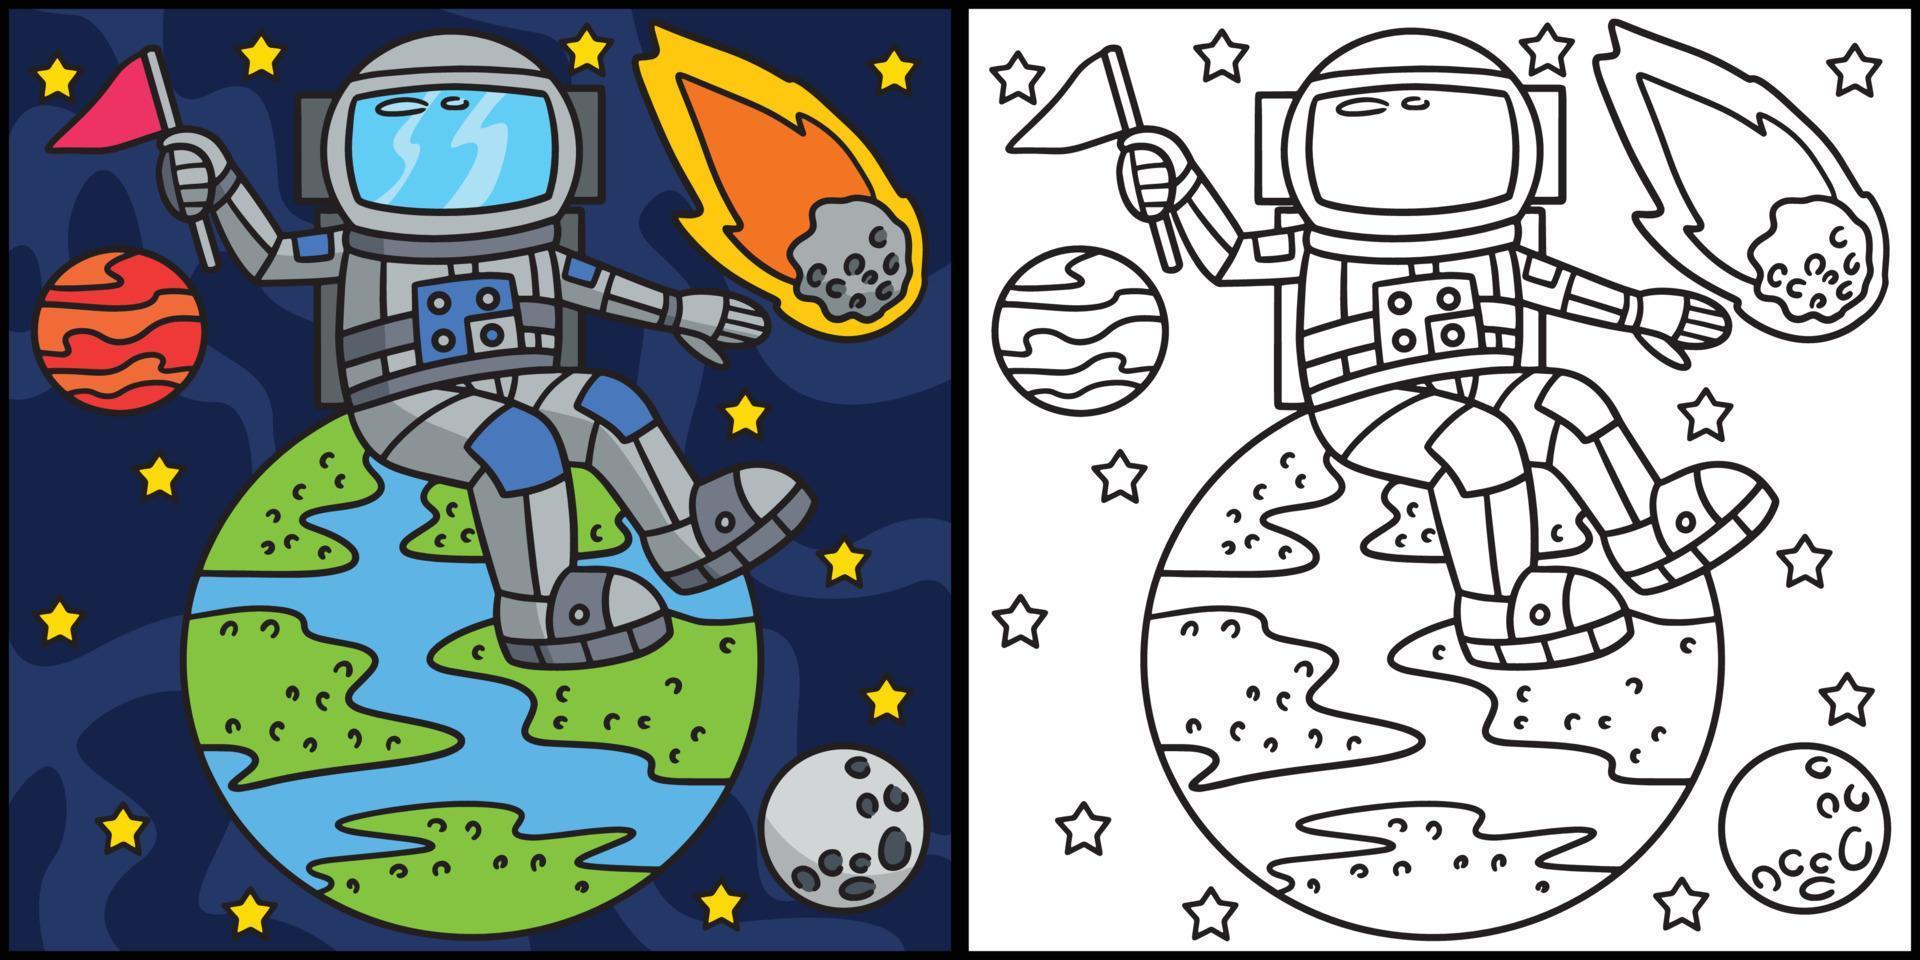 Astronaut Sitting On Earth Coloring Illustration vector